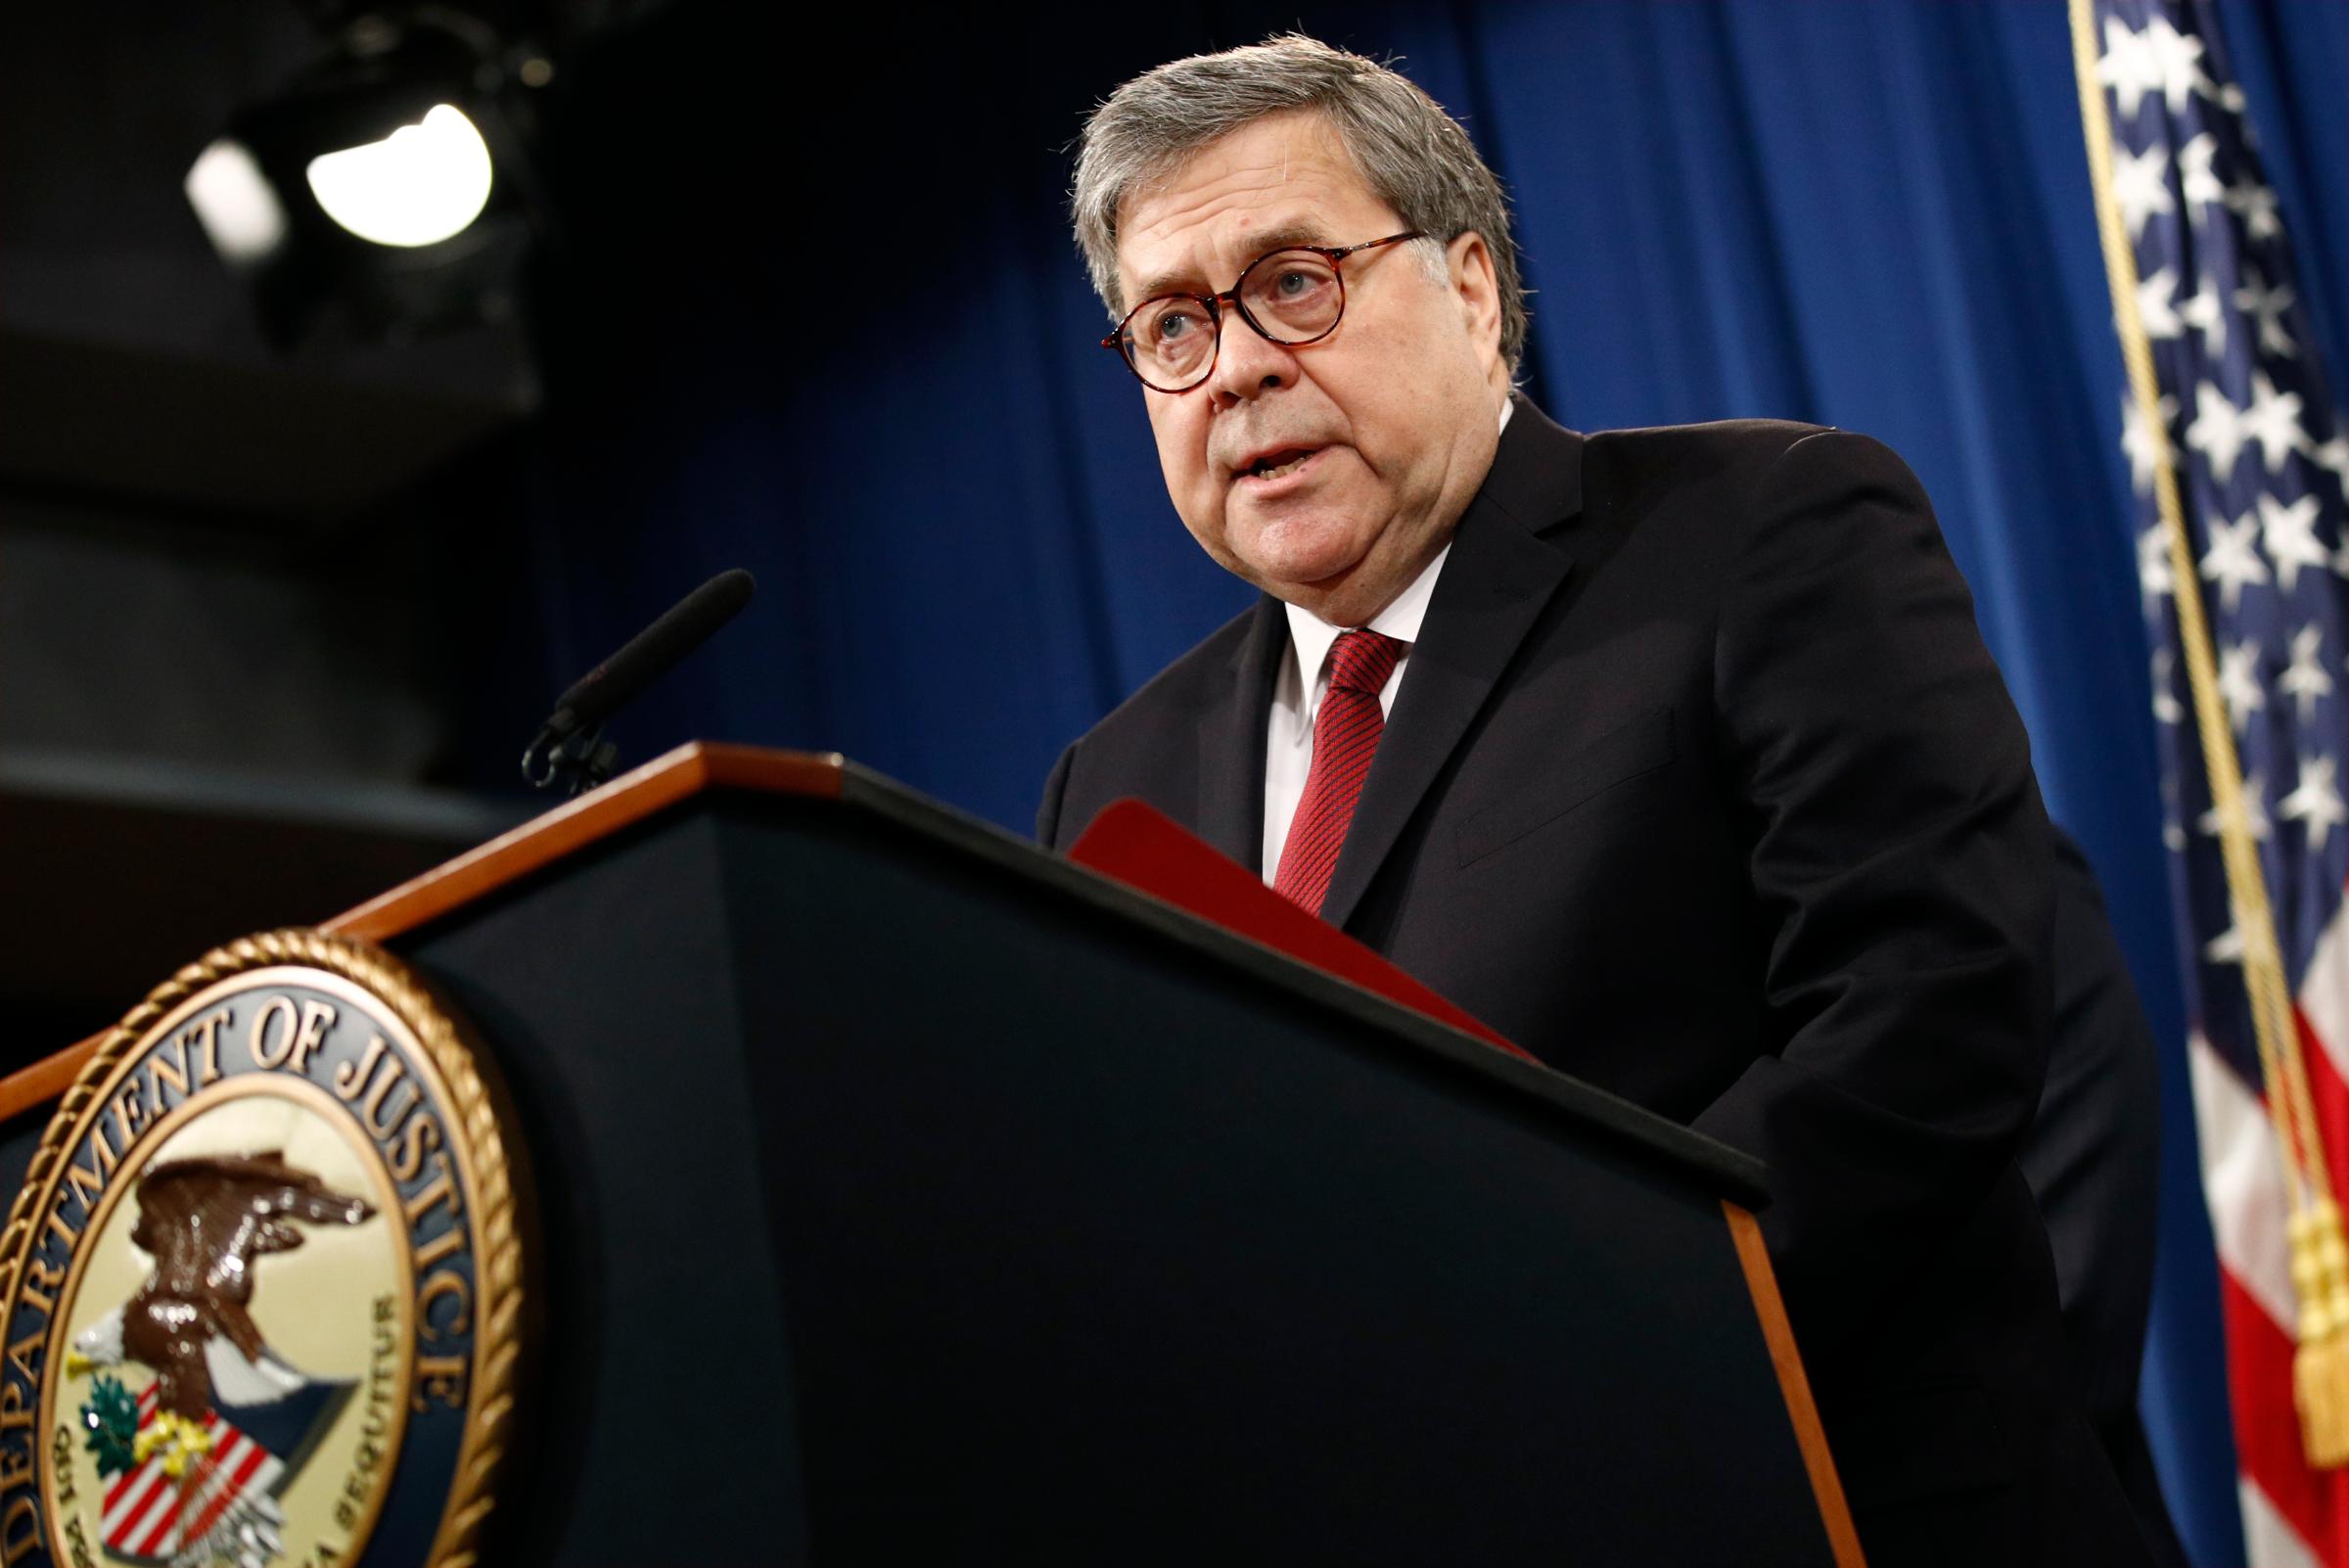 Attorney General William Barr speaks about the release of a redacted version of special counsel Robert Mueller's report during a news conference,